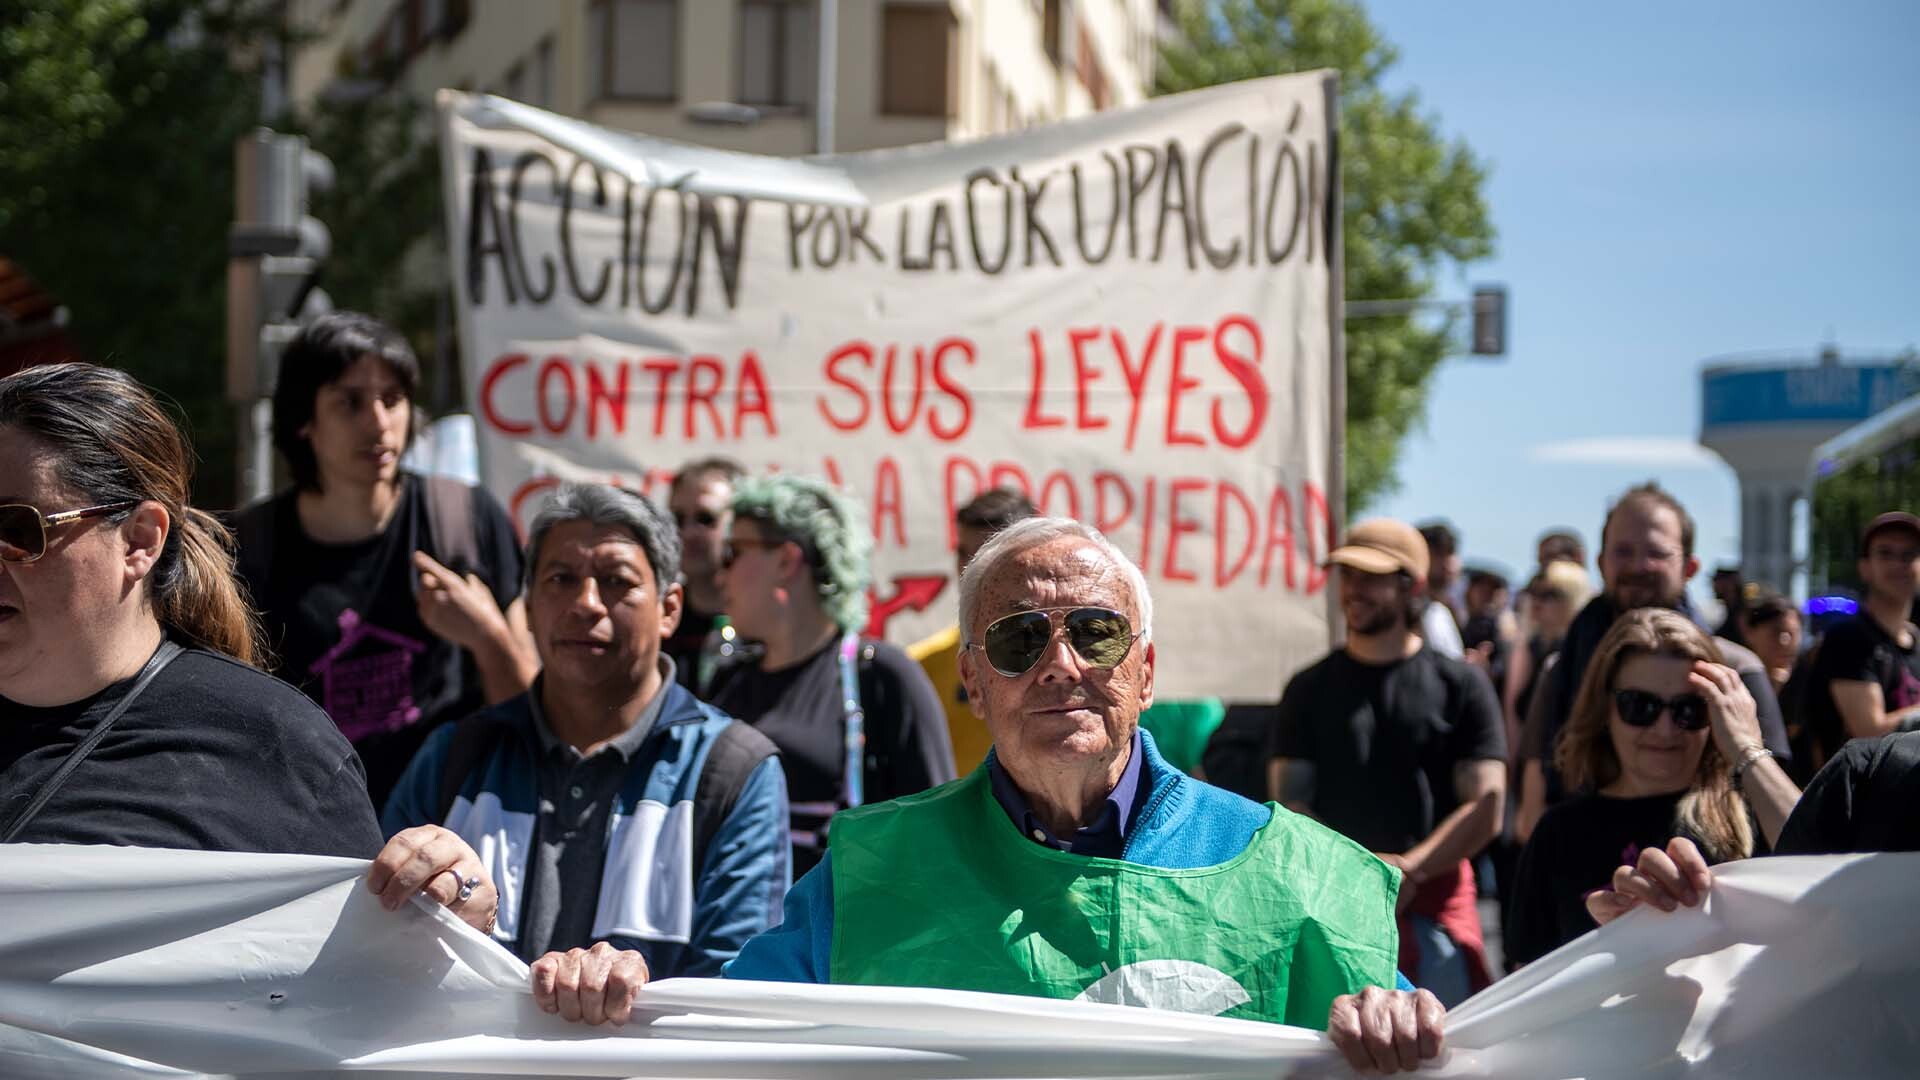 Spain’s Housing Battles: A pensioner-turned-activist fights evictions